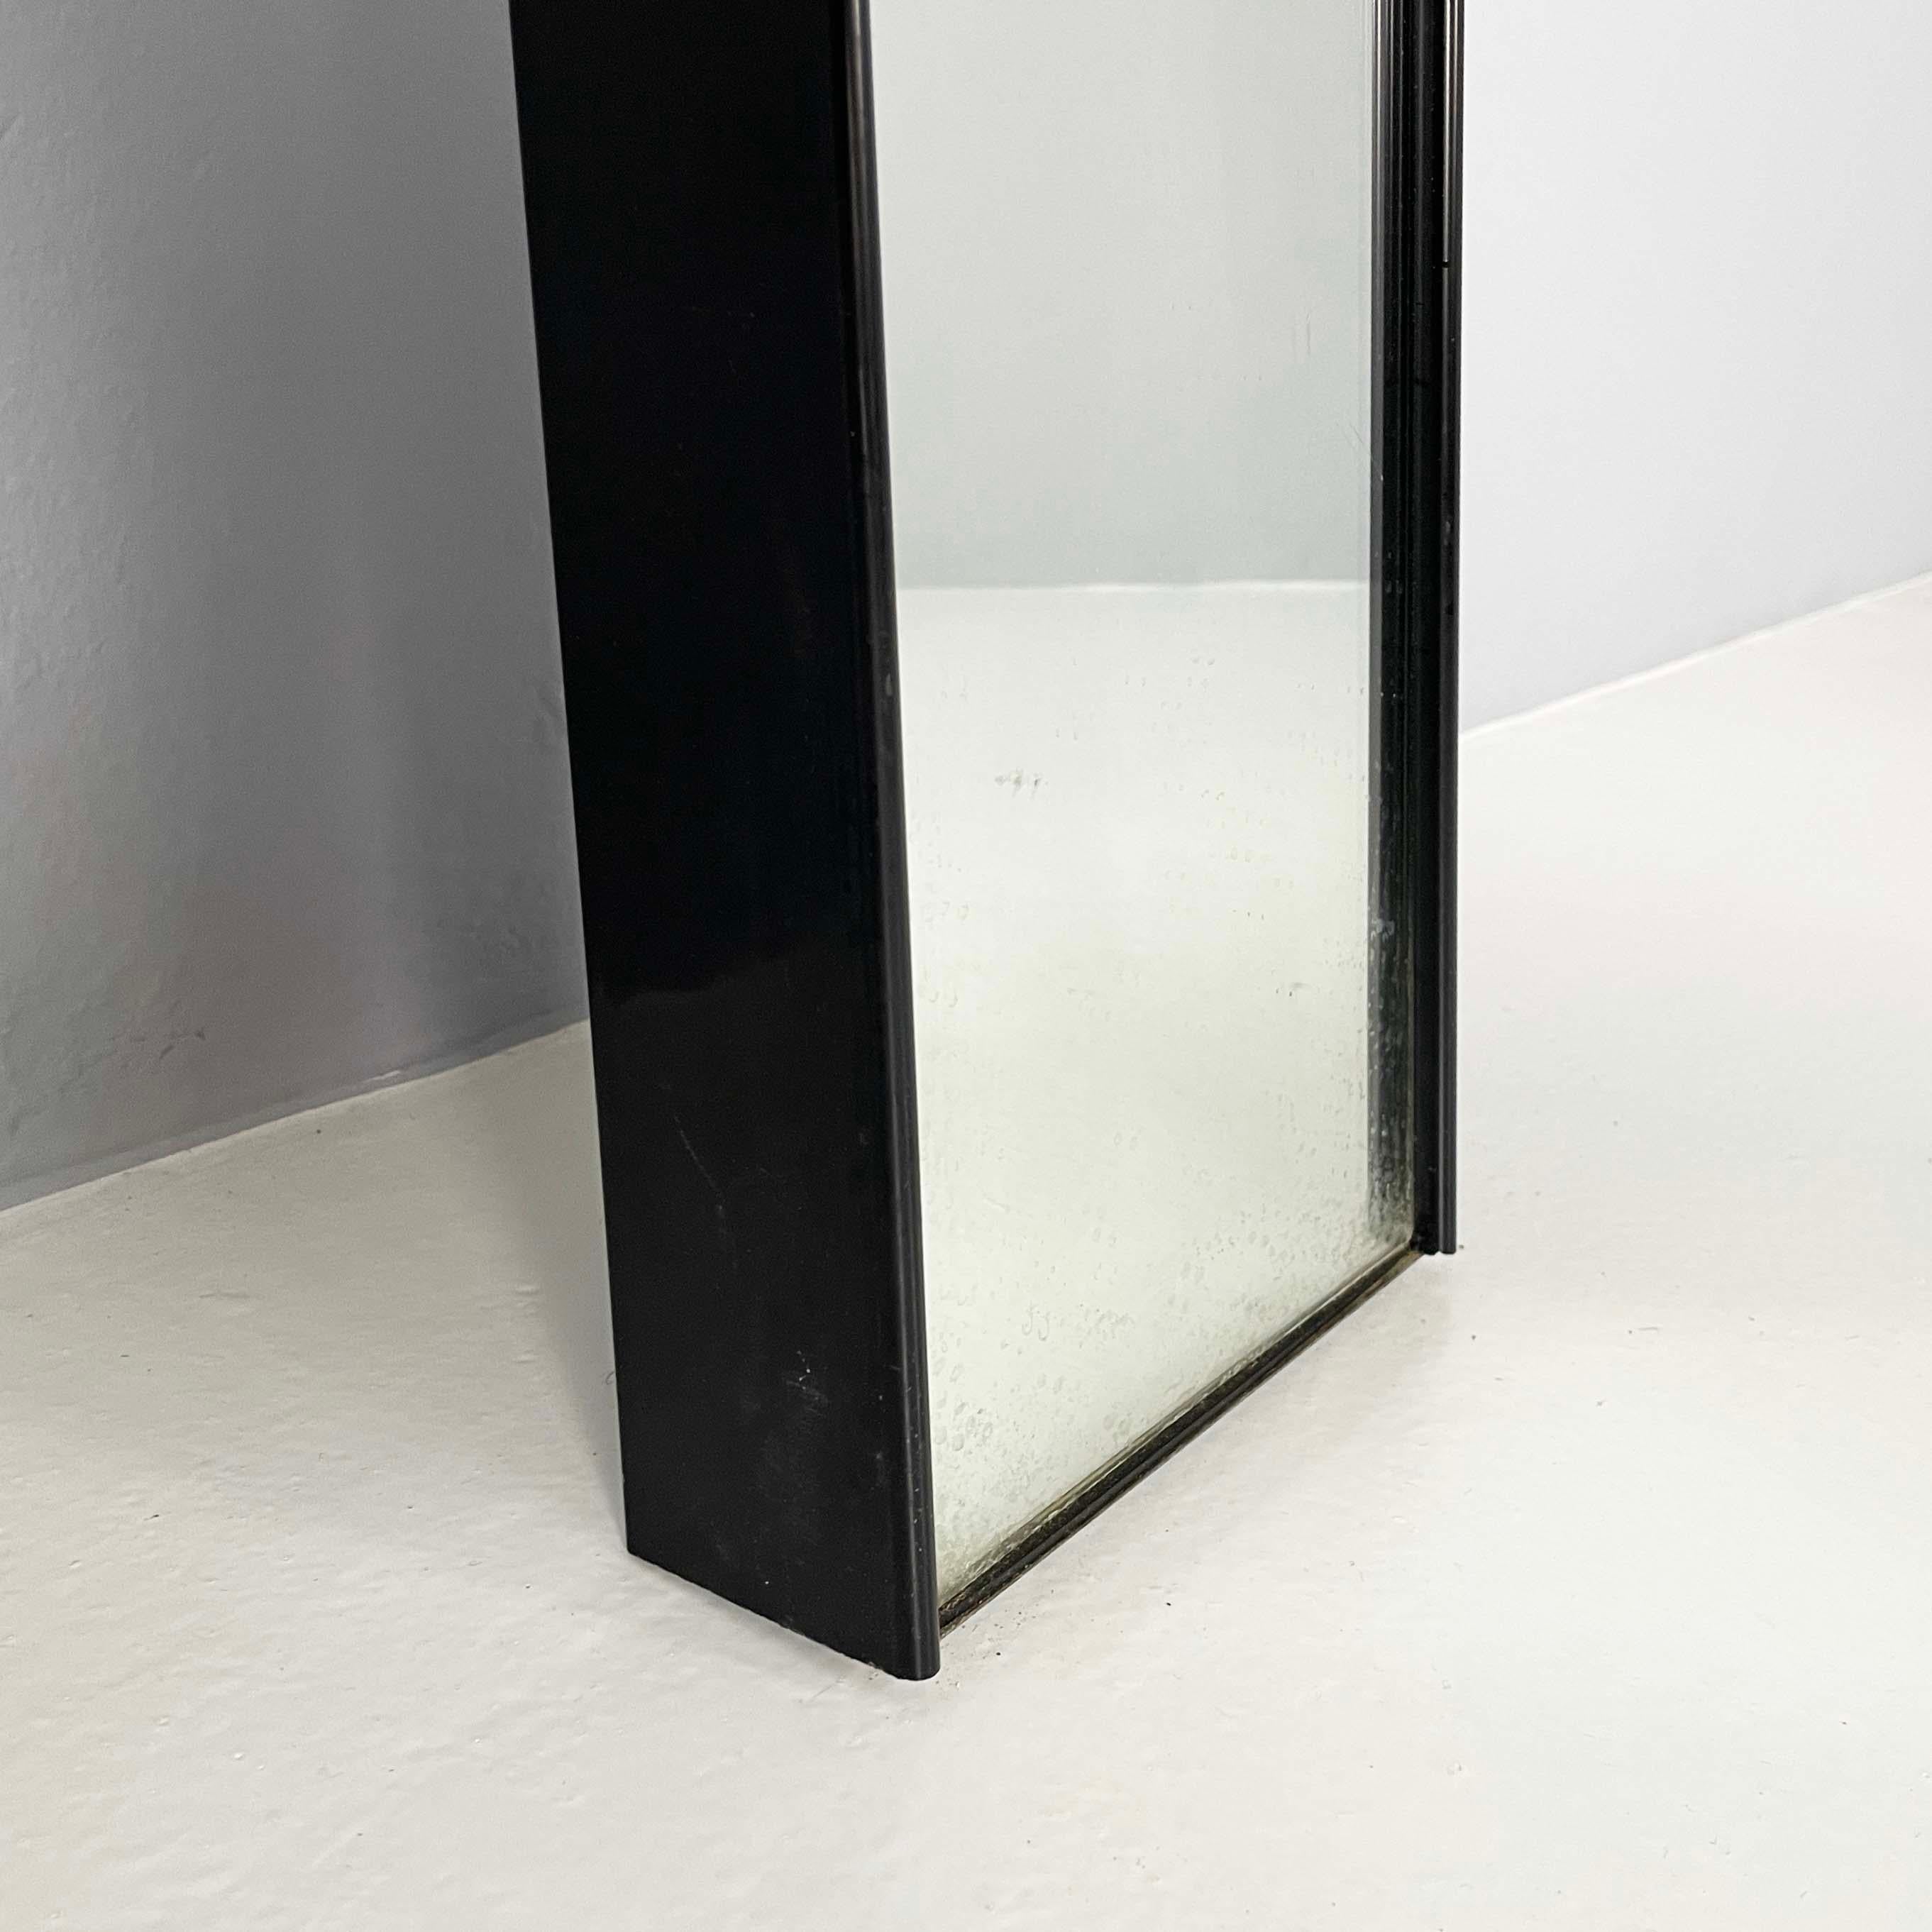 Italian modern Wall mirror hanger Gronda by Luciano Bertoncini for Elco, 1970s For Sale 5